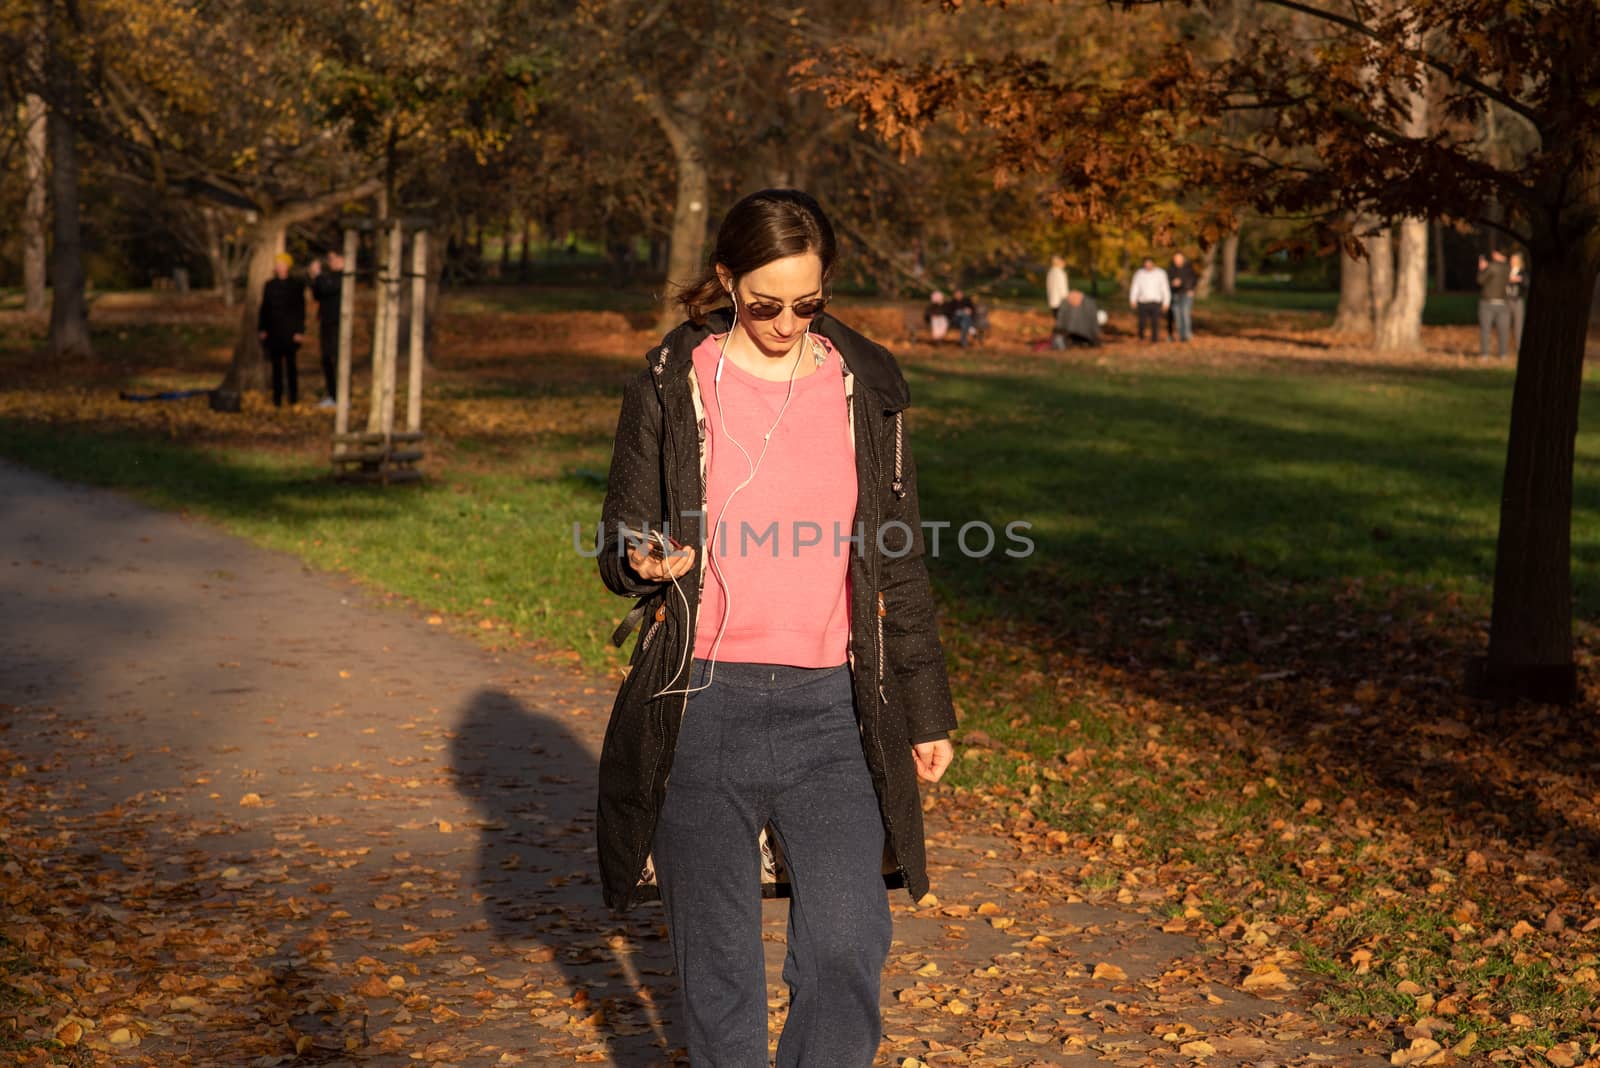 11/14/2020. Park Stromovka. Prague czech Republic. A woman is walking in the park on a Sunday winter day. by gonzalobell